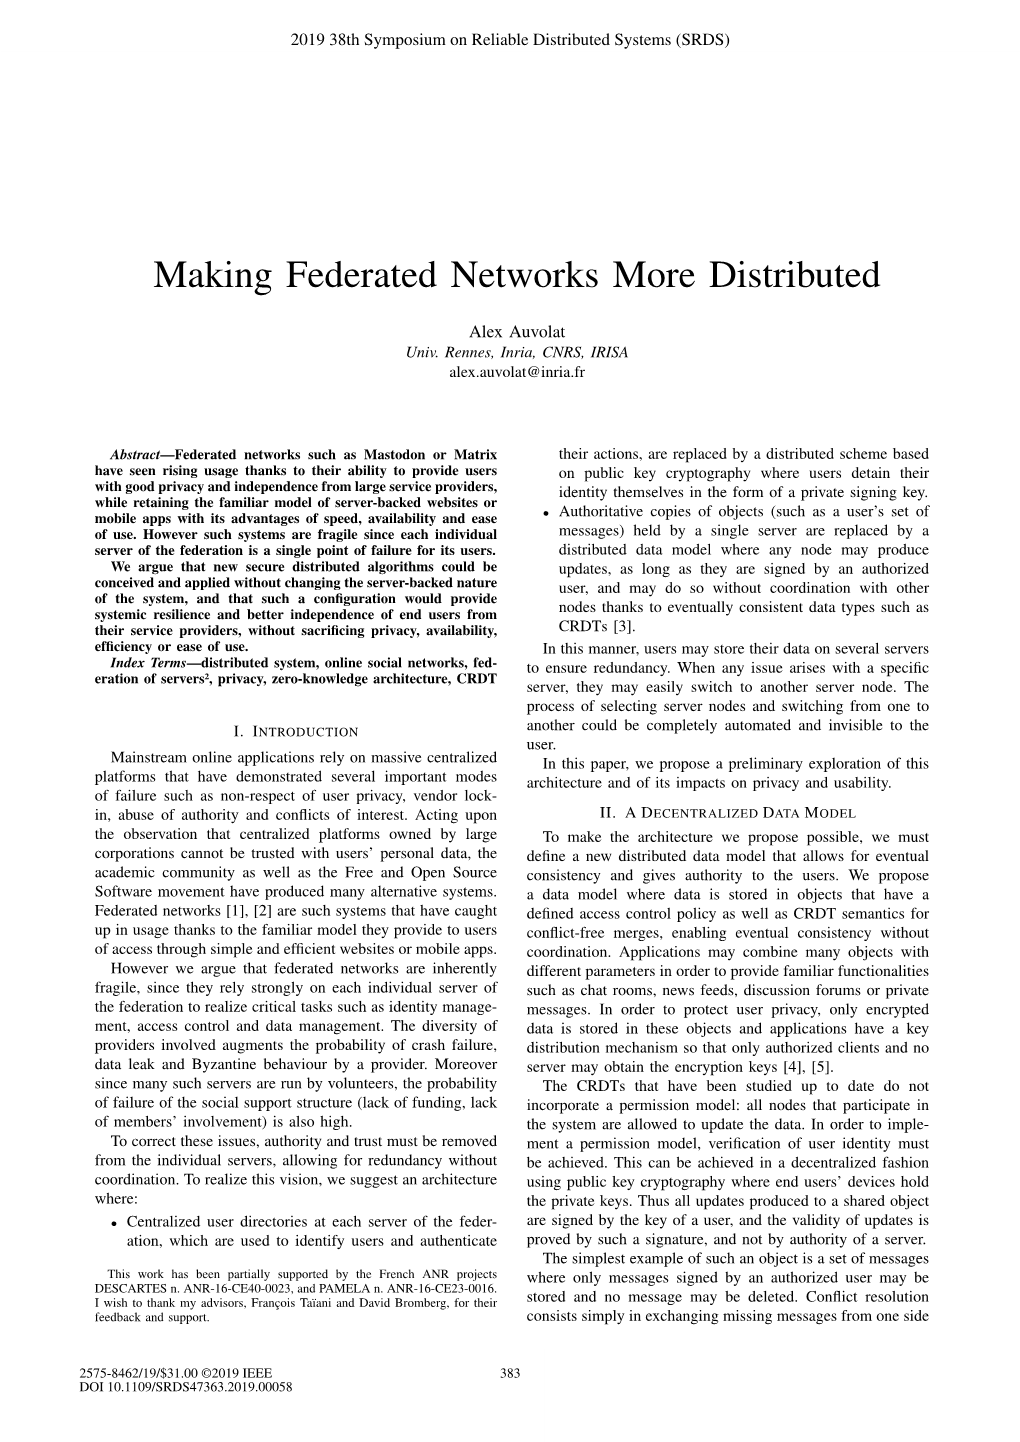 Making Federated Networks More Distributed